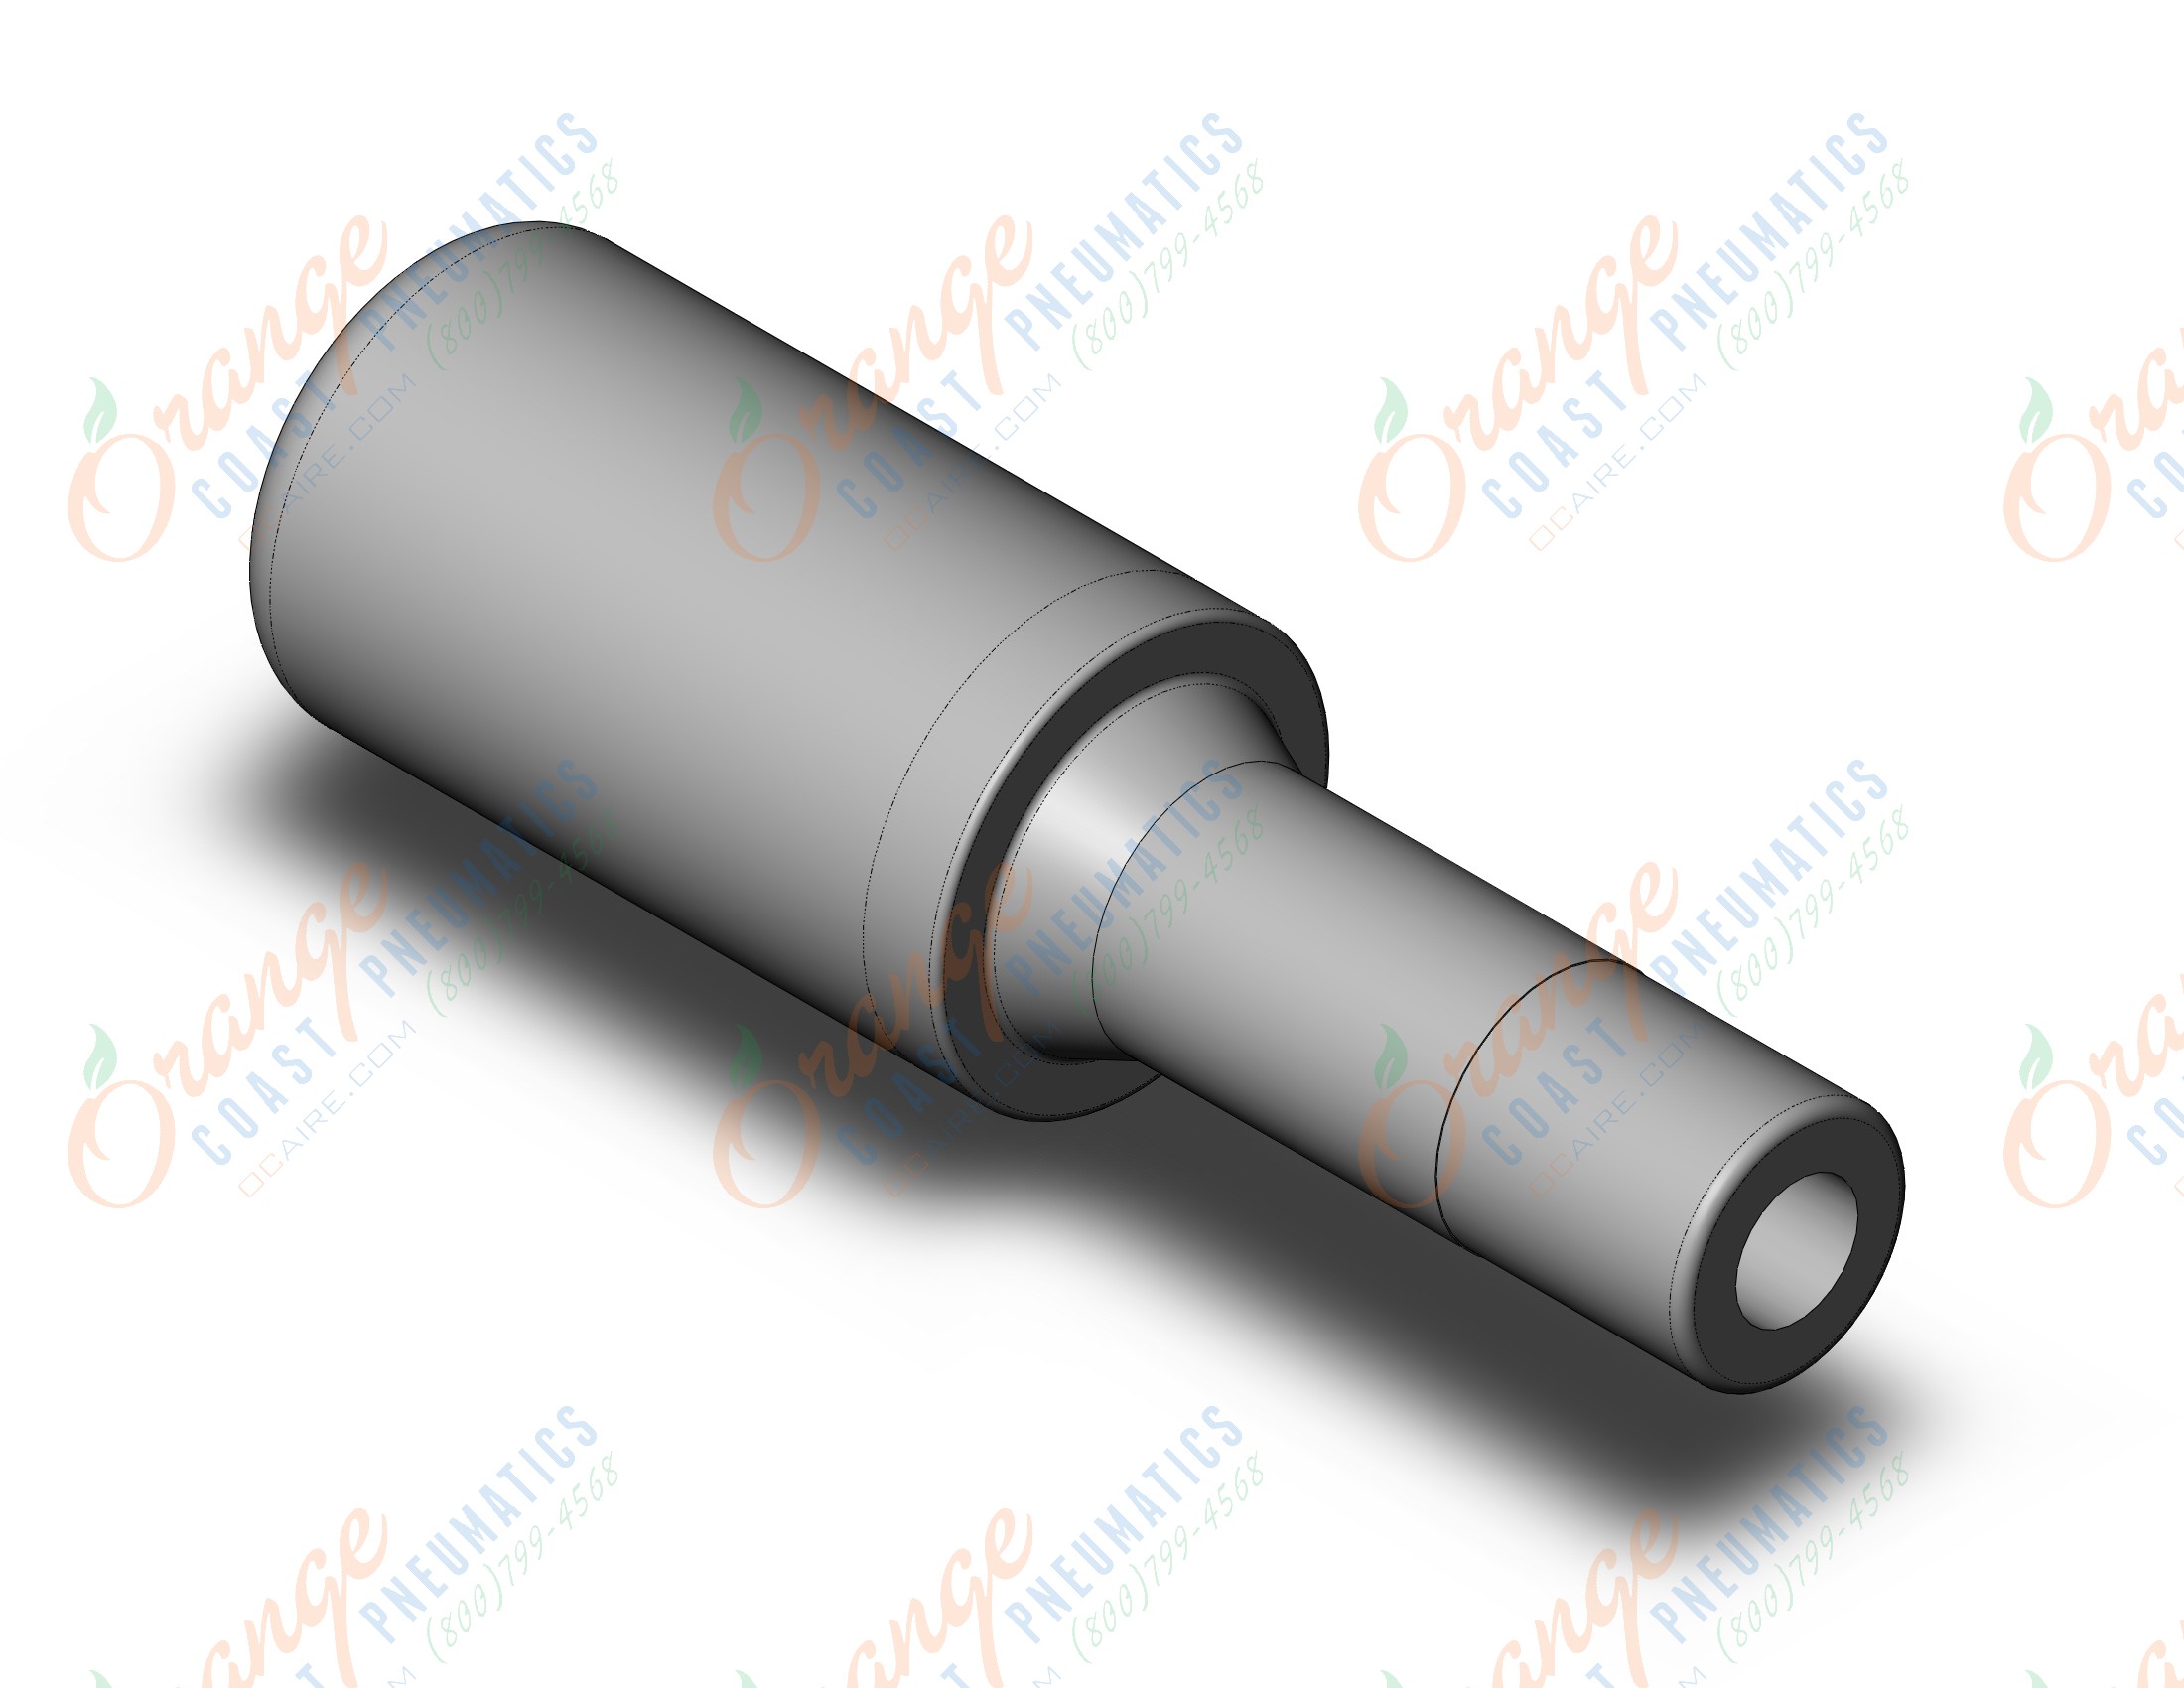 SMC AN20-C11 silencer, AN SILENCER (must be purchased in multiples of 10)